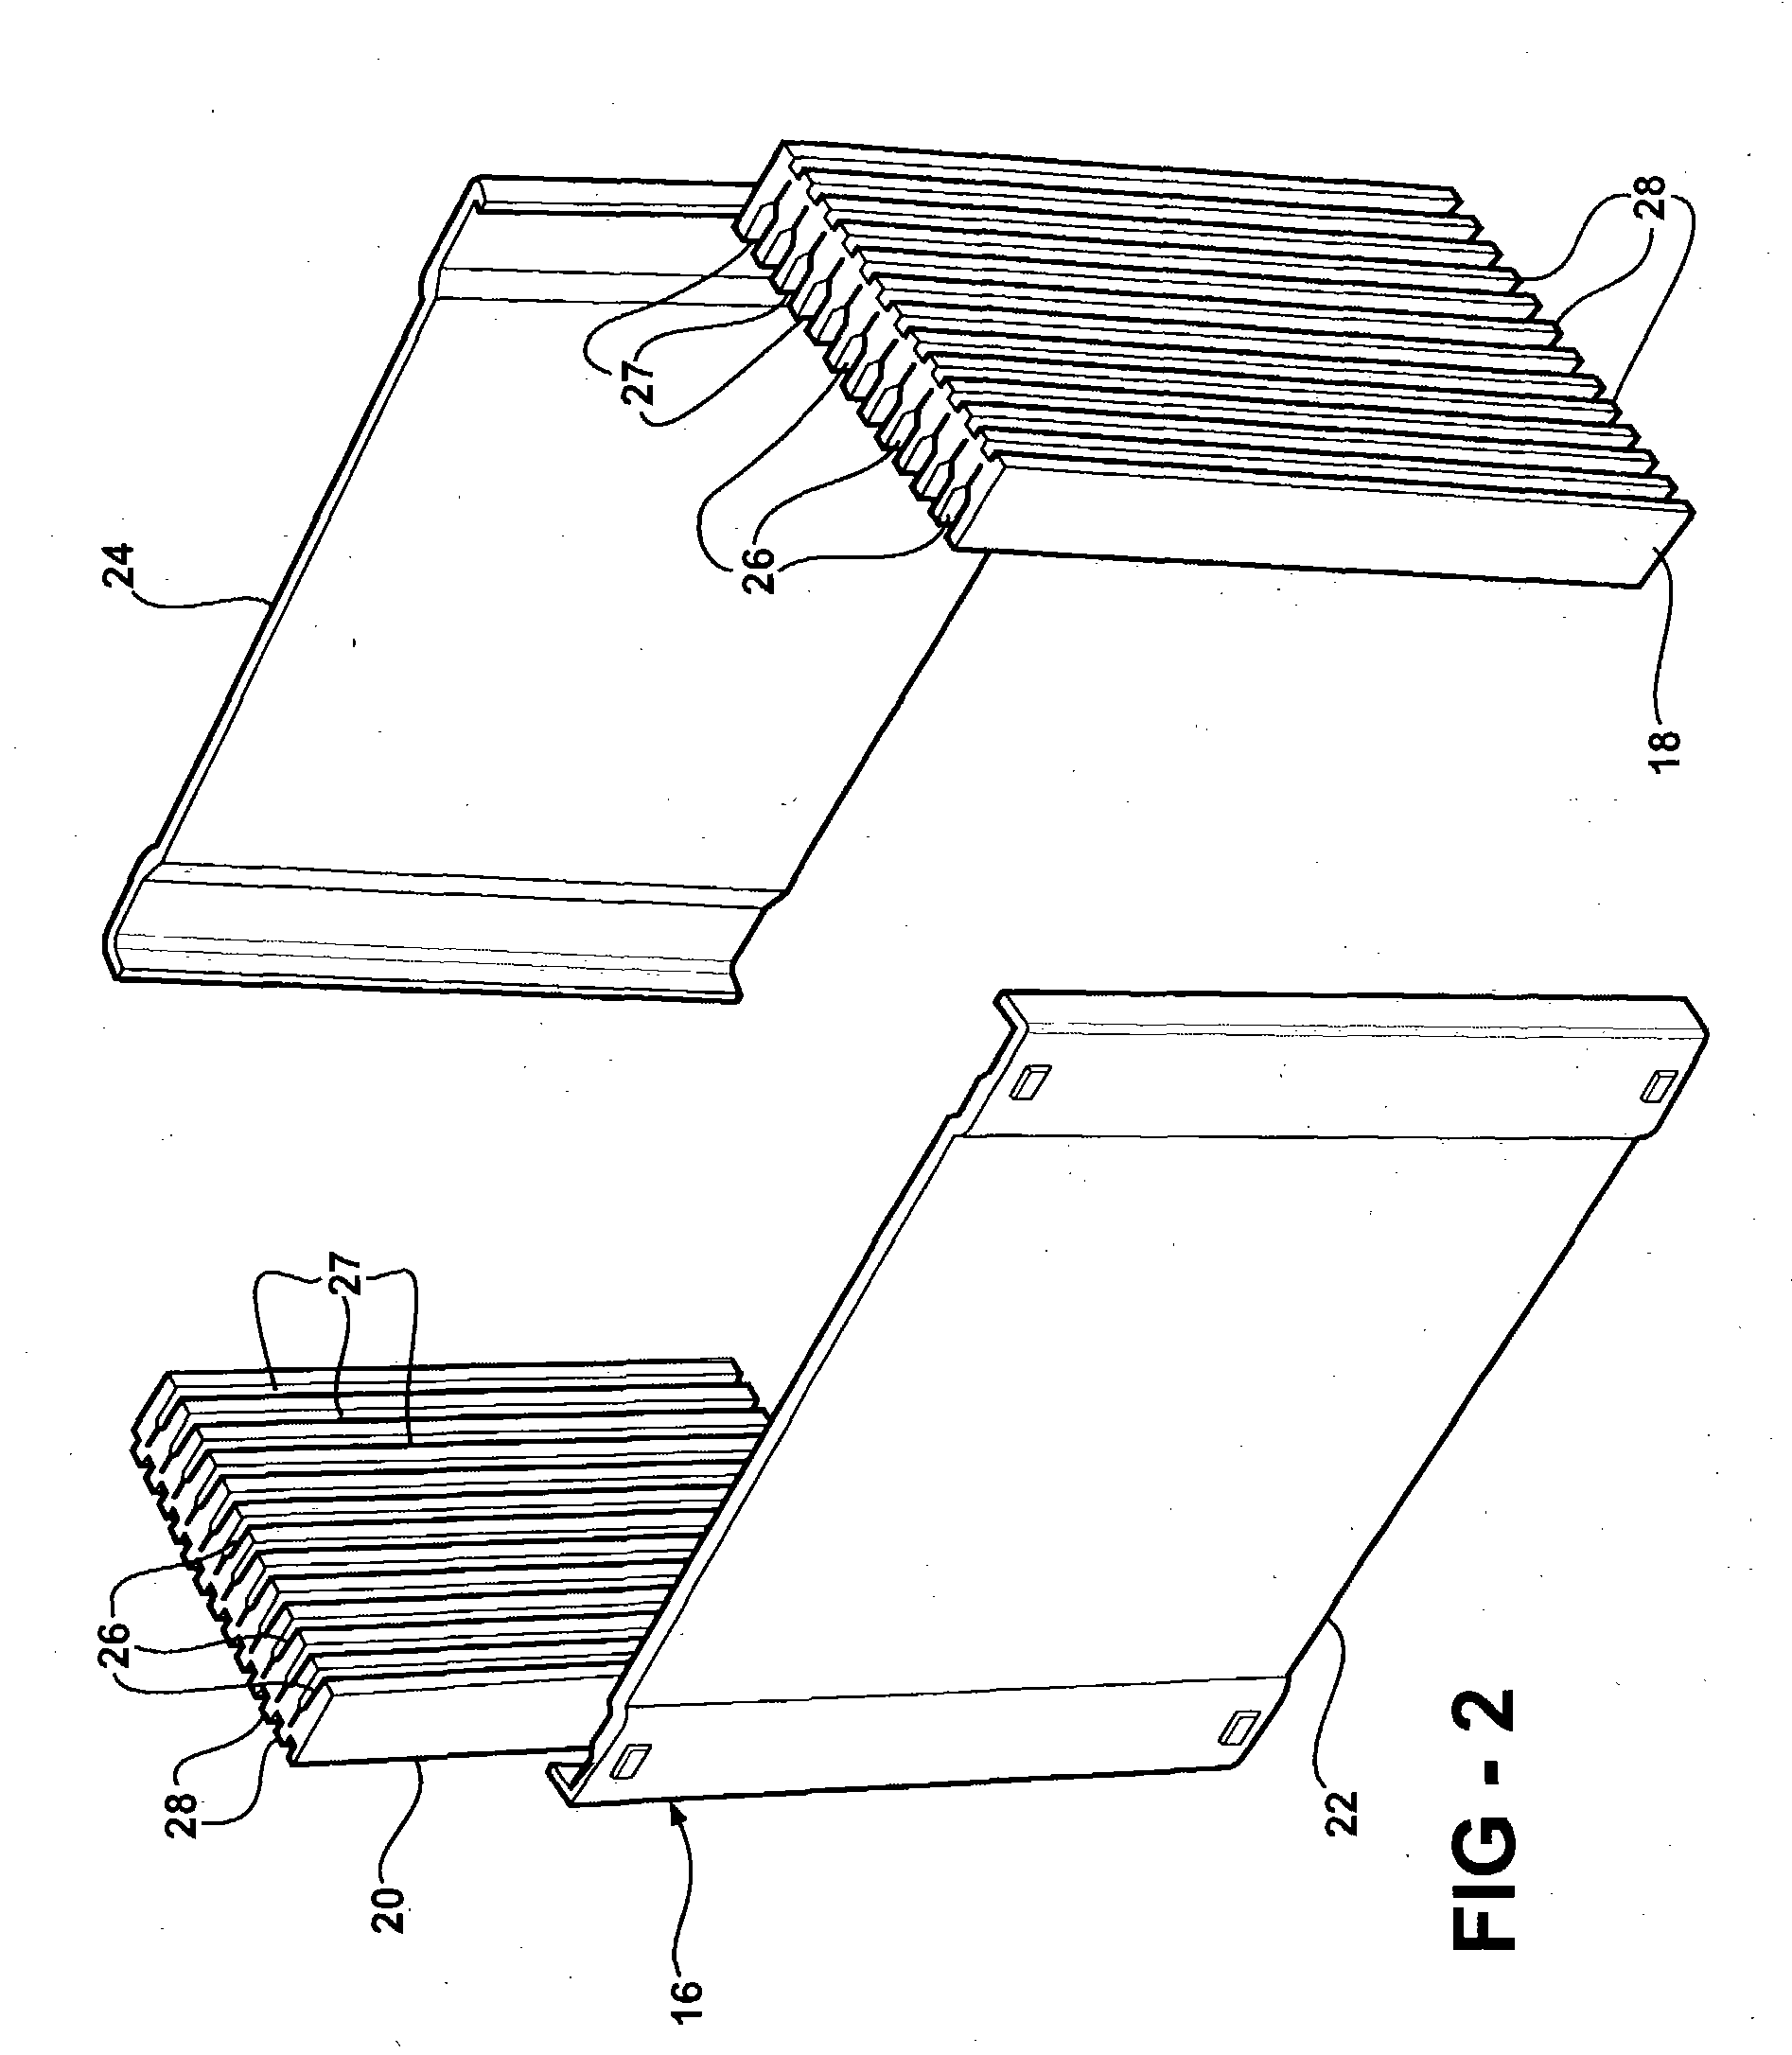 Battery assembly and method of making same